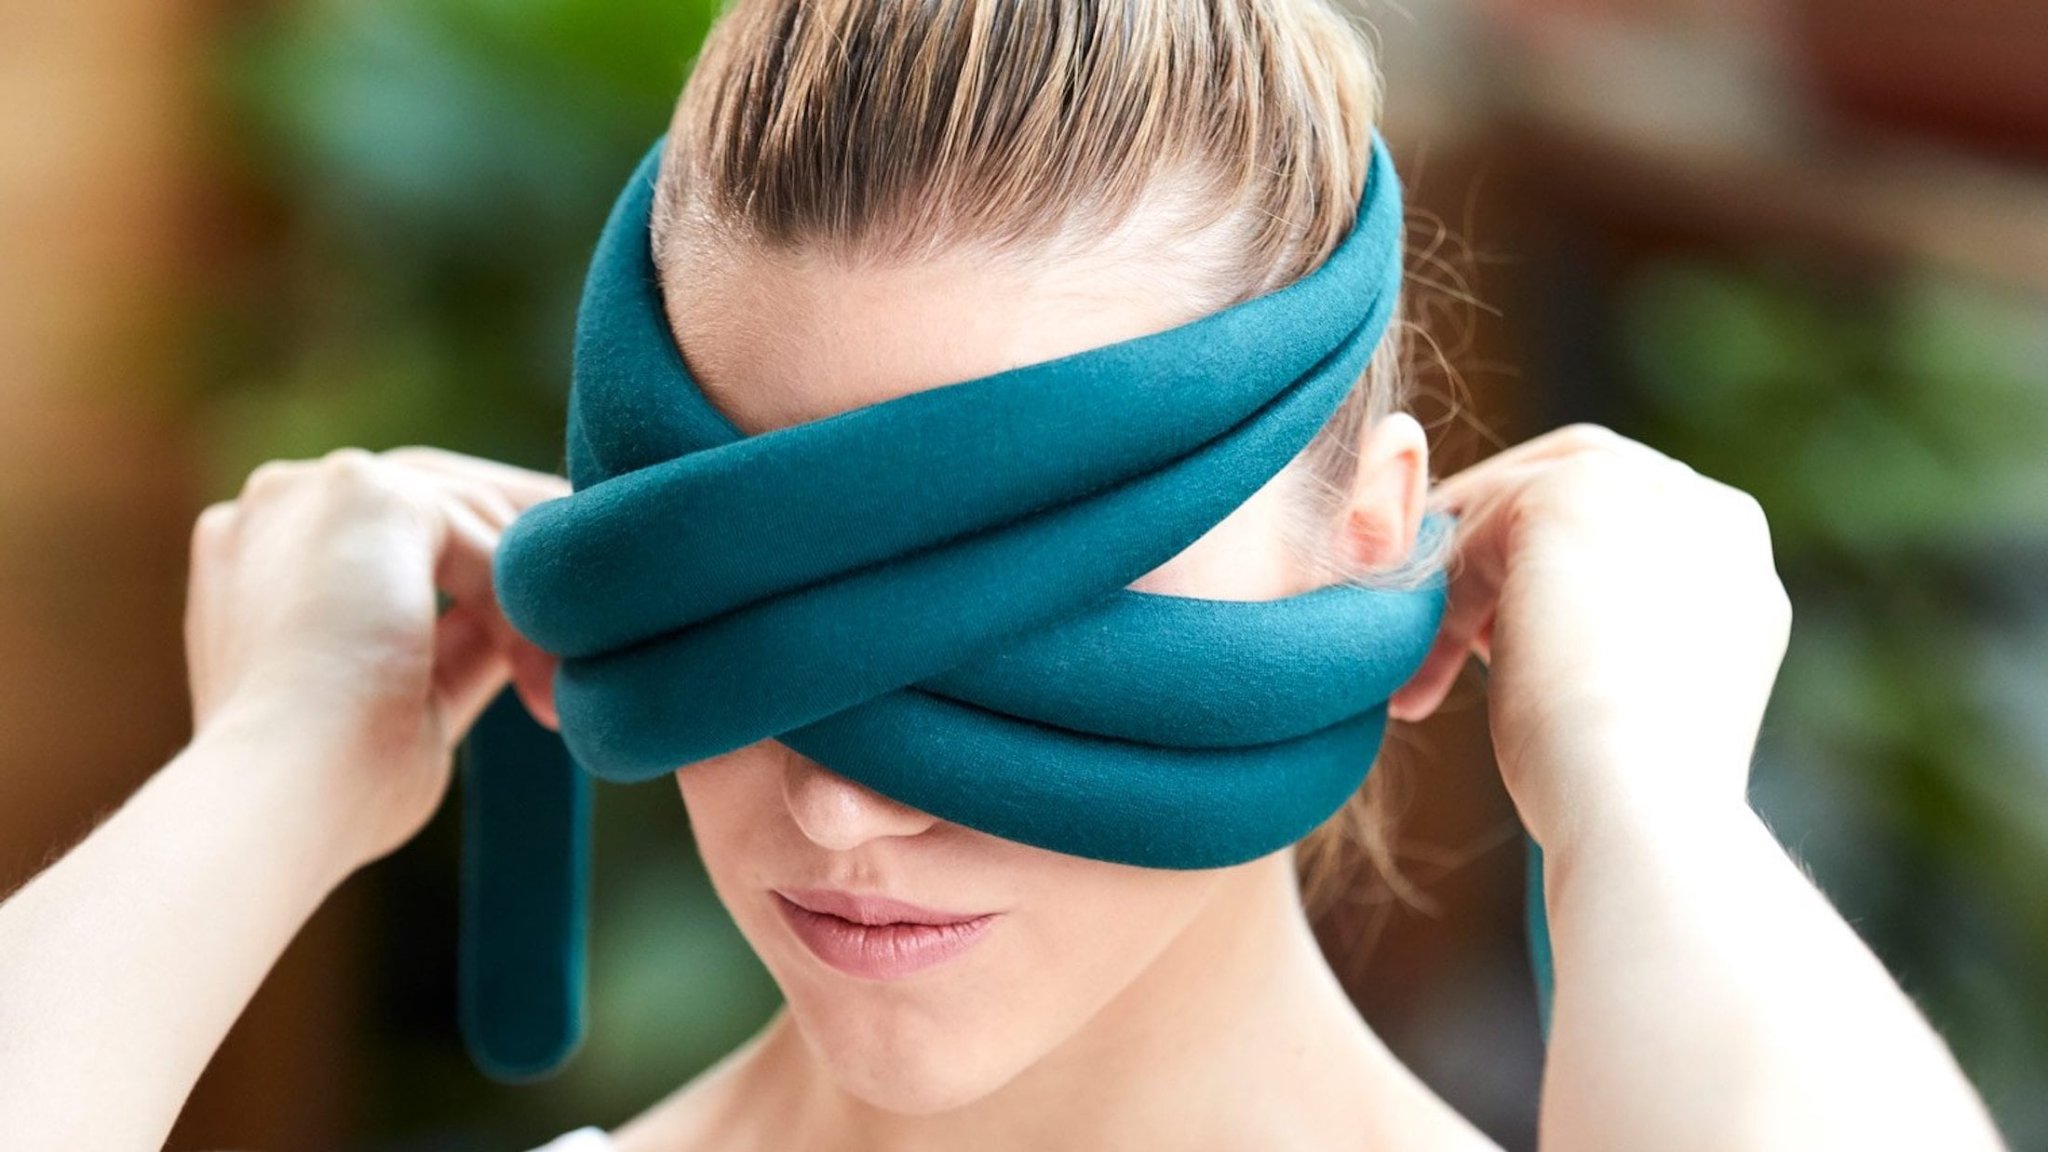 OSTRICHPILLOW LOOP Eye Mask Pillow wraps around your face to black out the world